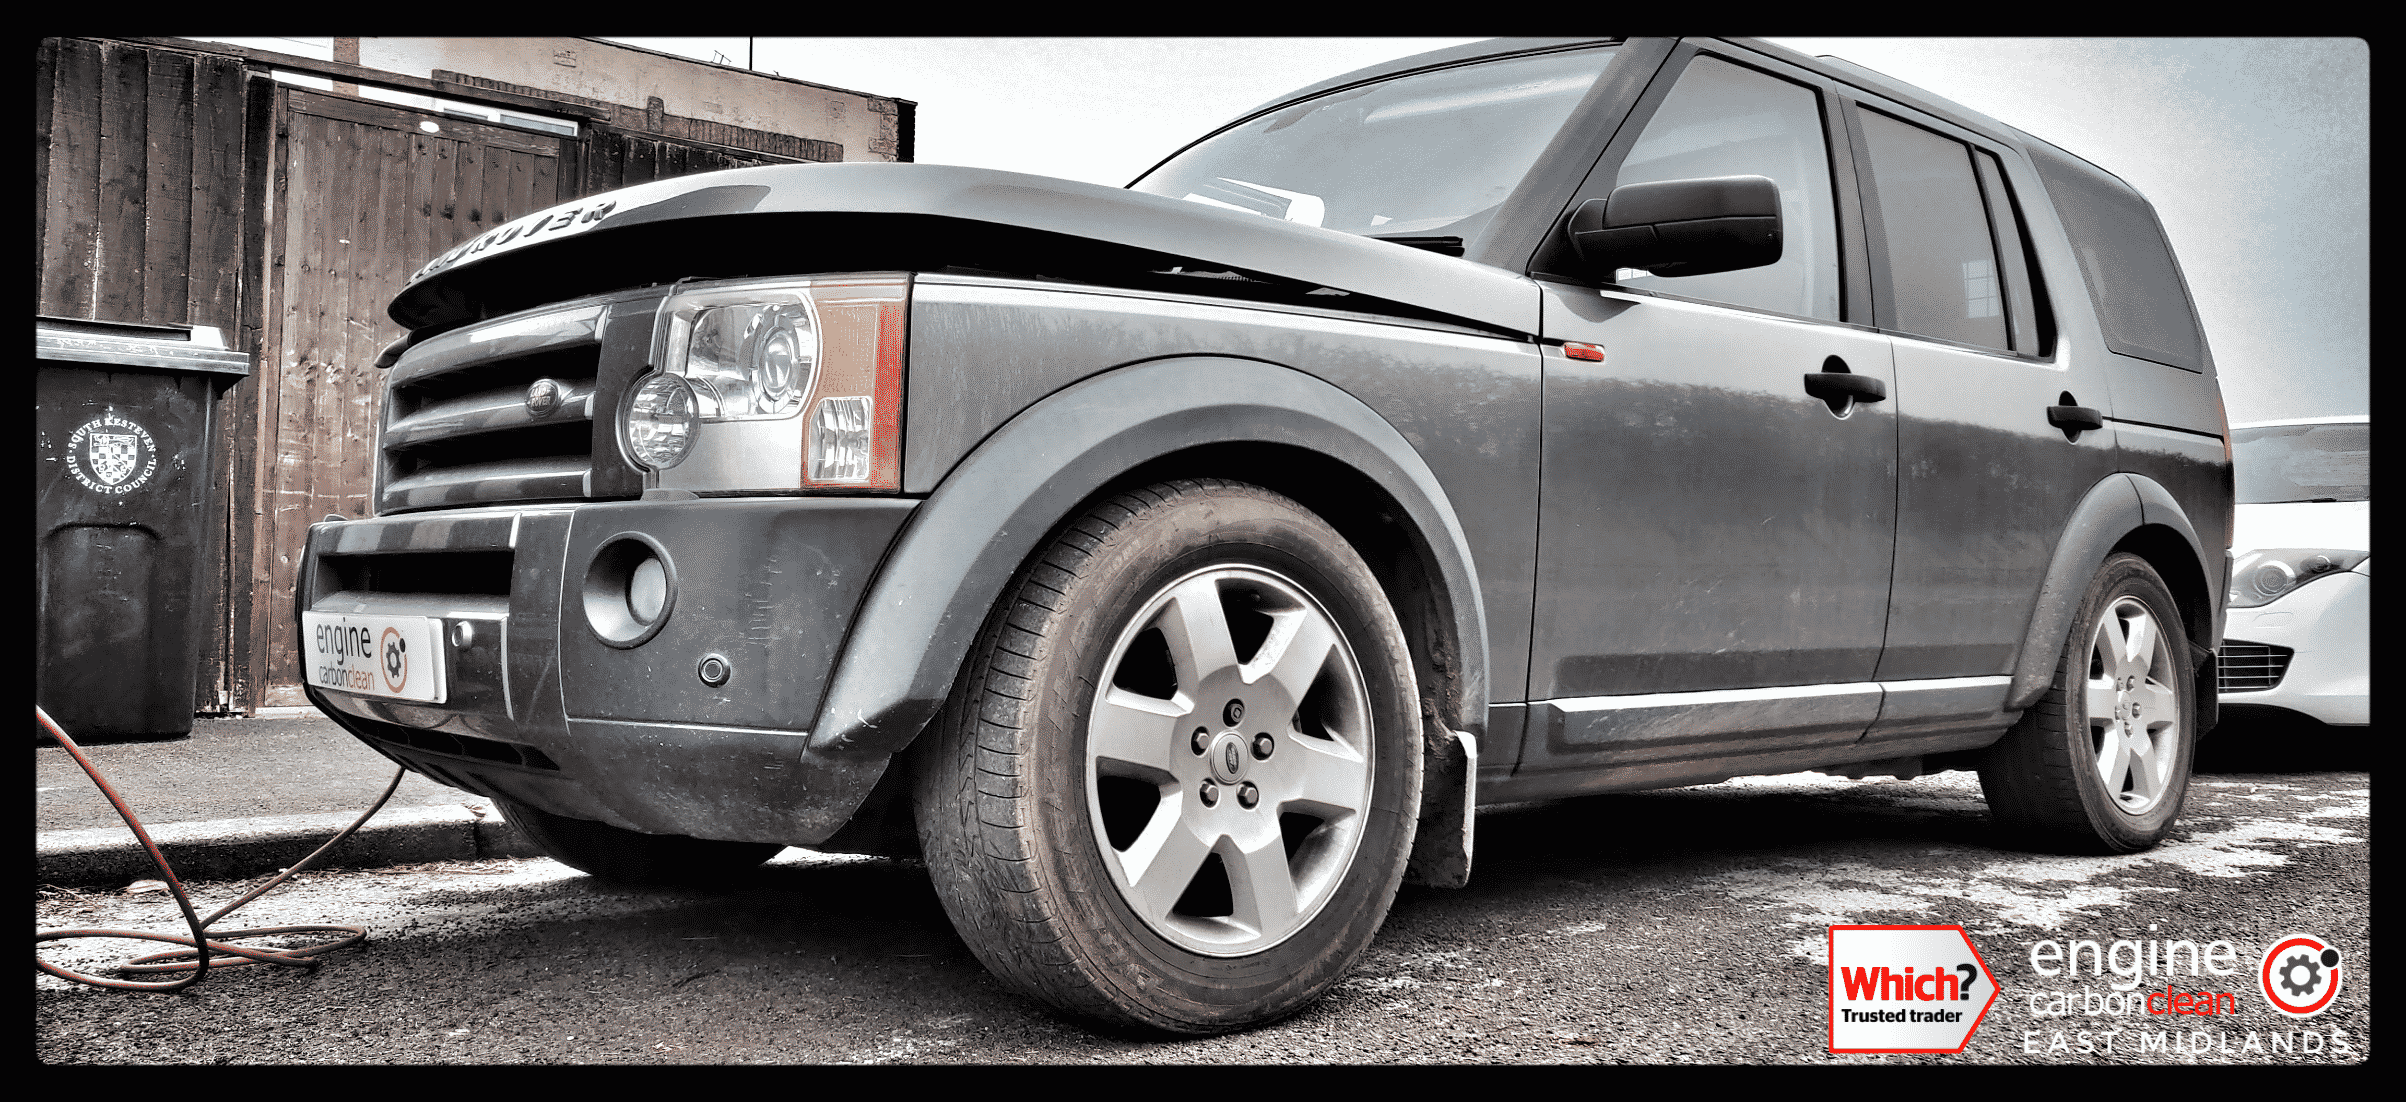 Diagnostic Consultation and Engine Carbon Clean - Land Rover Discovery 3 2.7 (2007 - 136,057 miles)